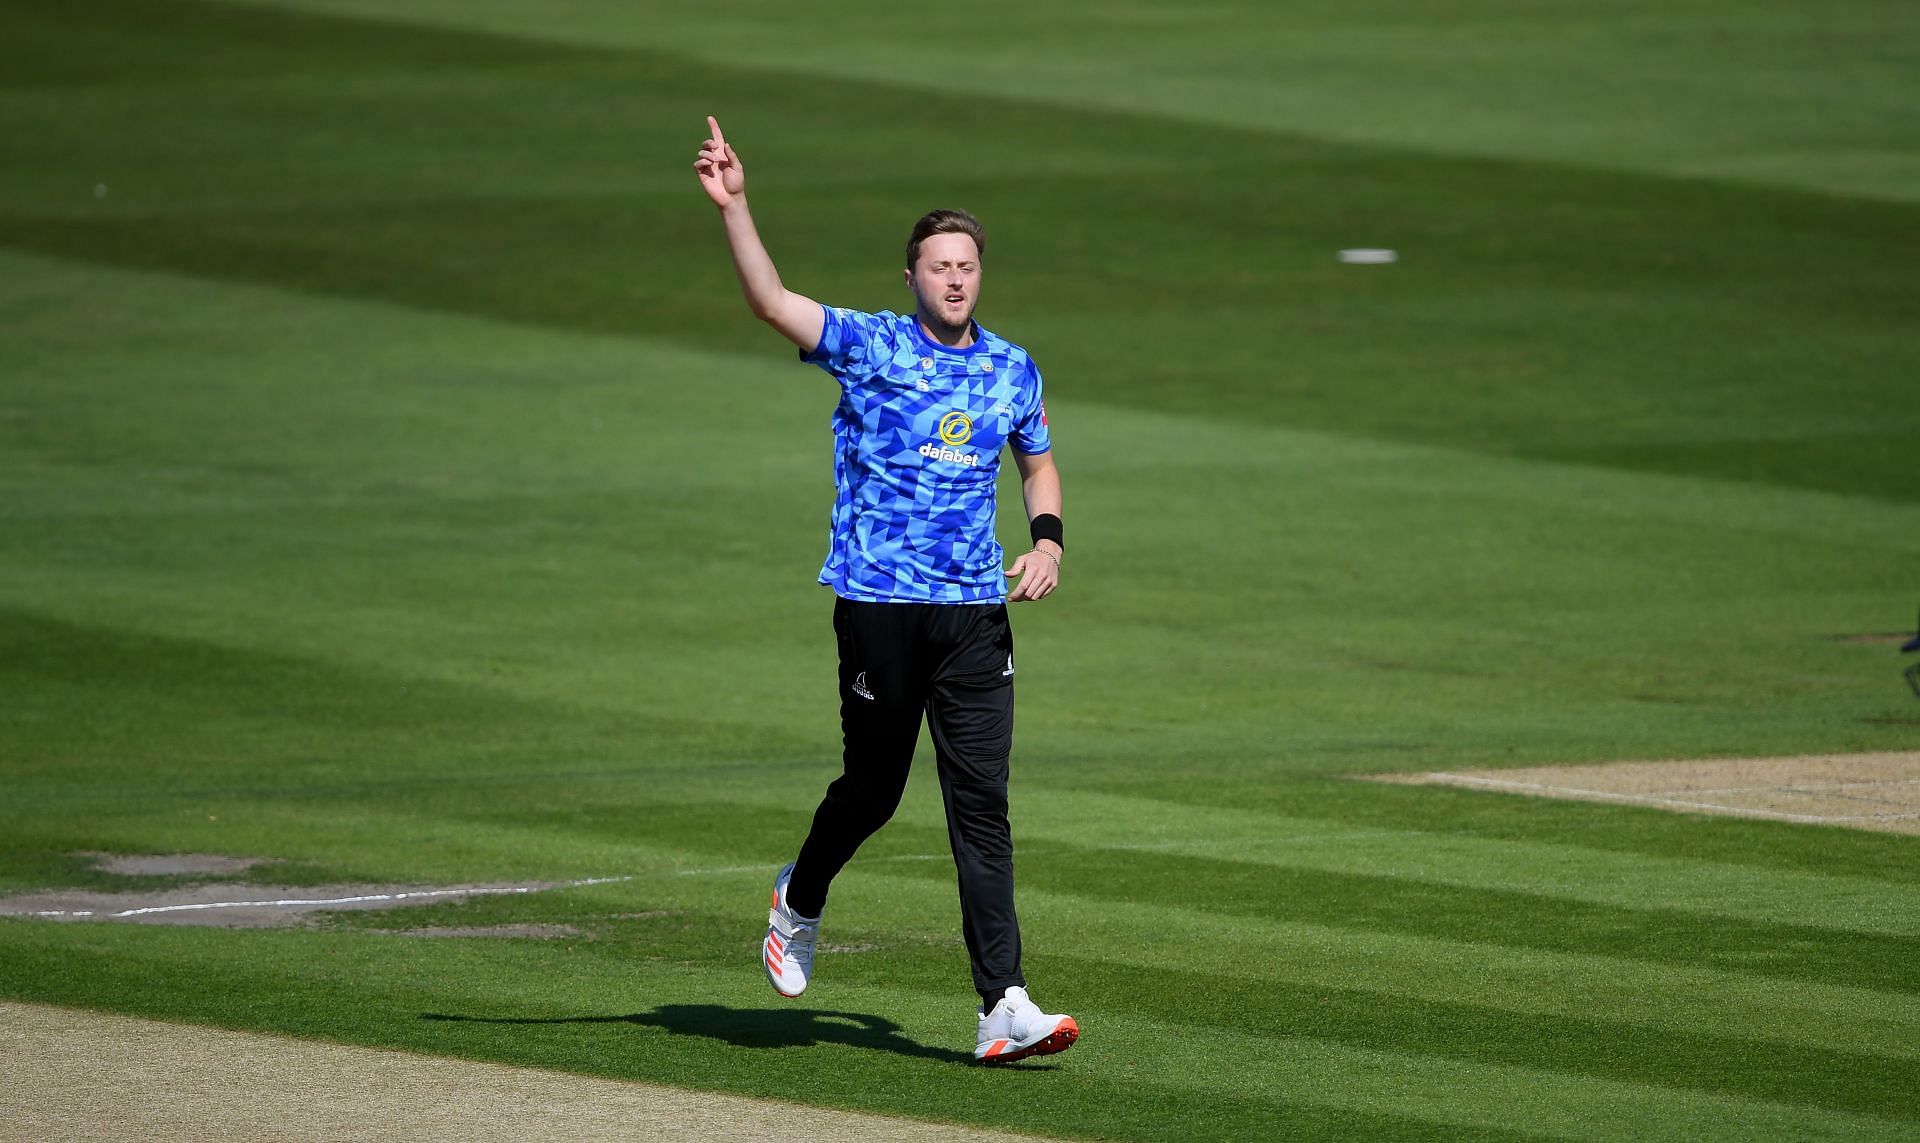 Sussex Sharks v Essex Eagles - T20 Vitality Blast 2020 (Image courtesy: Getty Images)